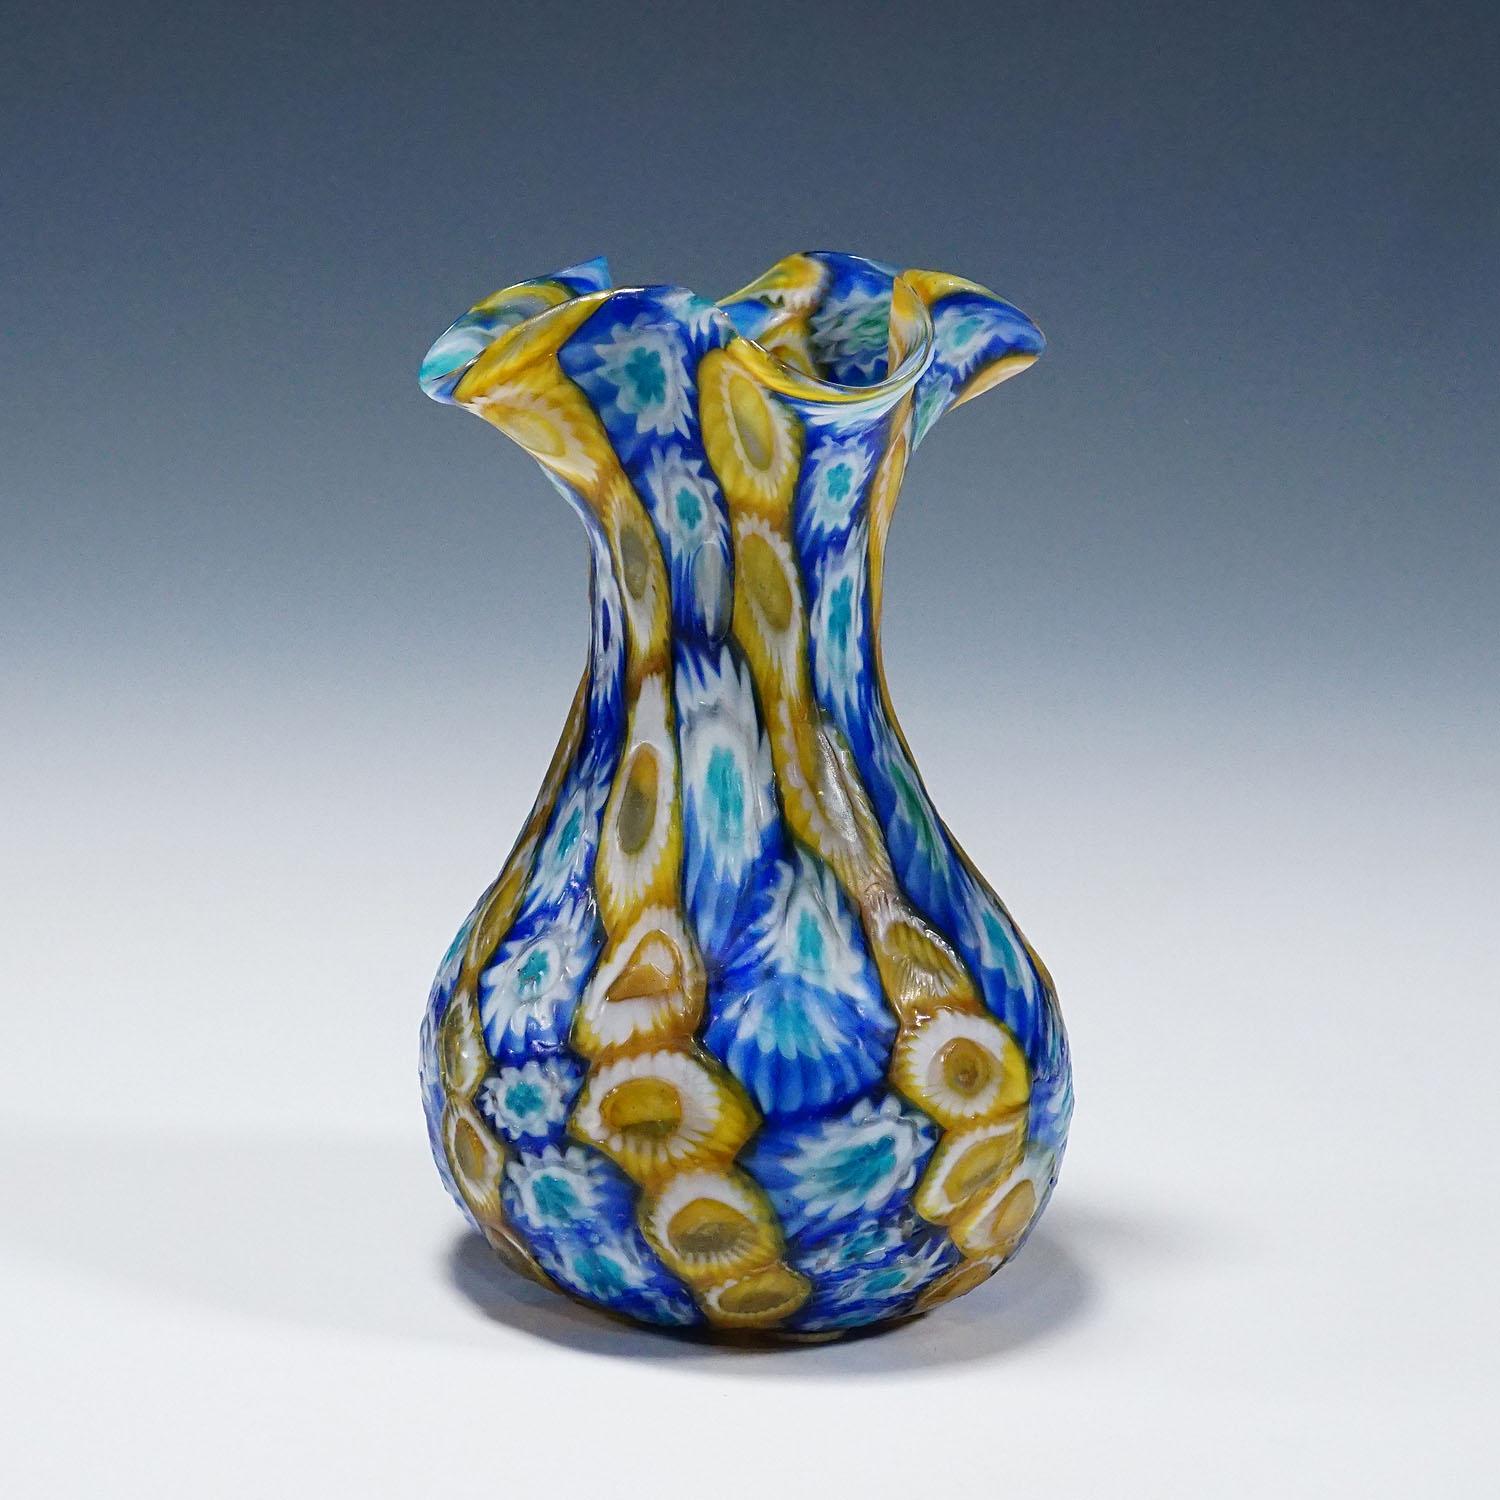 Antique Millefiori Vase, Fratelli Toso Murano ca. 1920s
Item e7091
An antique millefiori murrine glass vase manufactured by Vetreria Fratelli Toso, Murano around 1920. Made of polychrome murrines (blue, yellow and white) which were melted together.